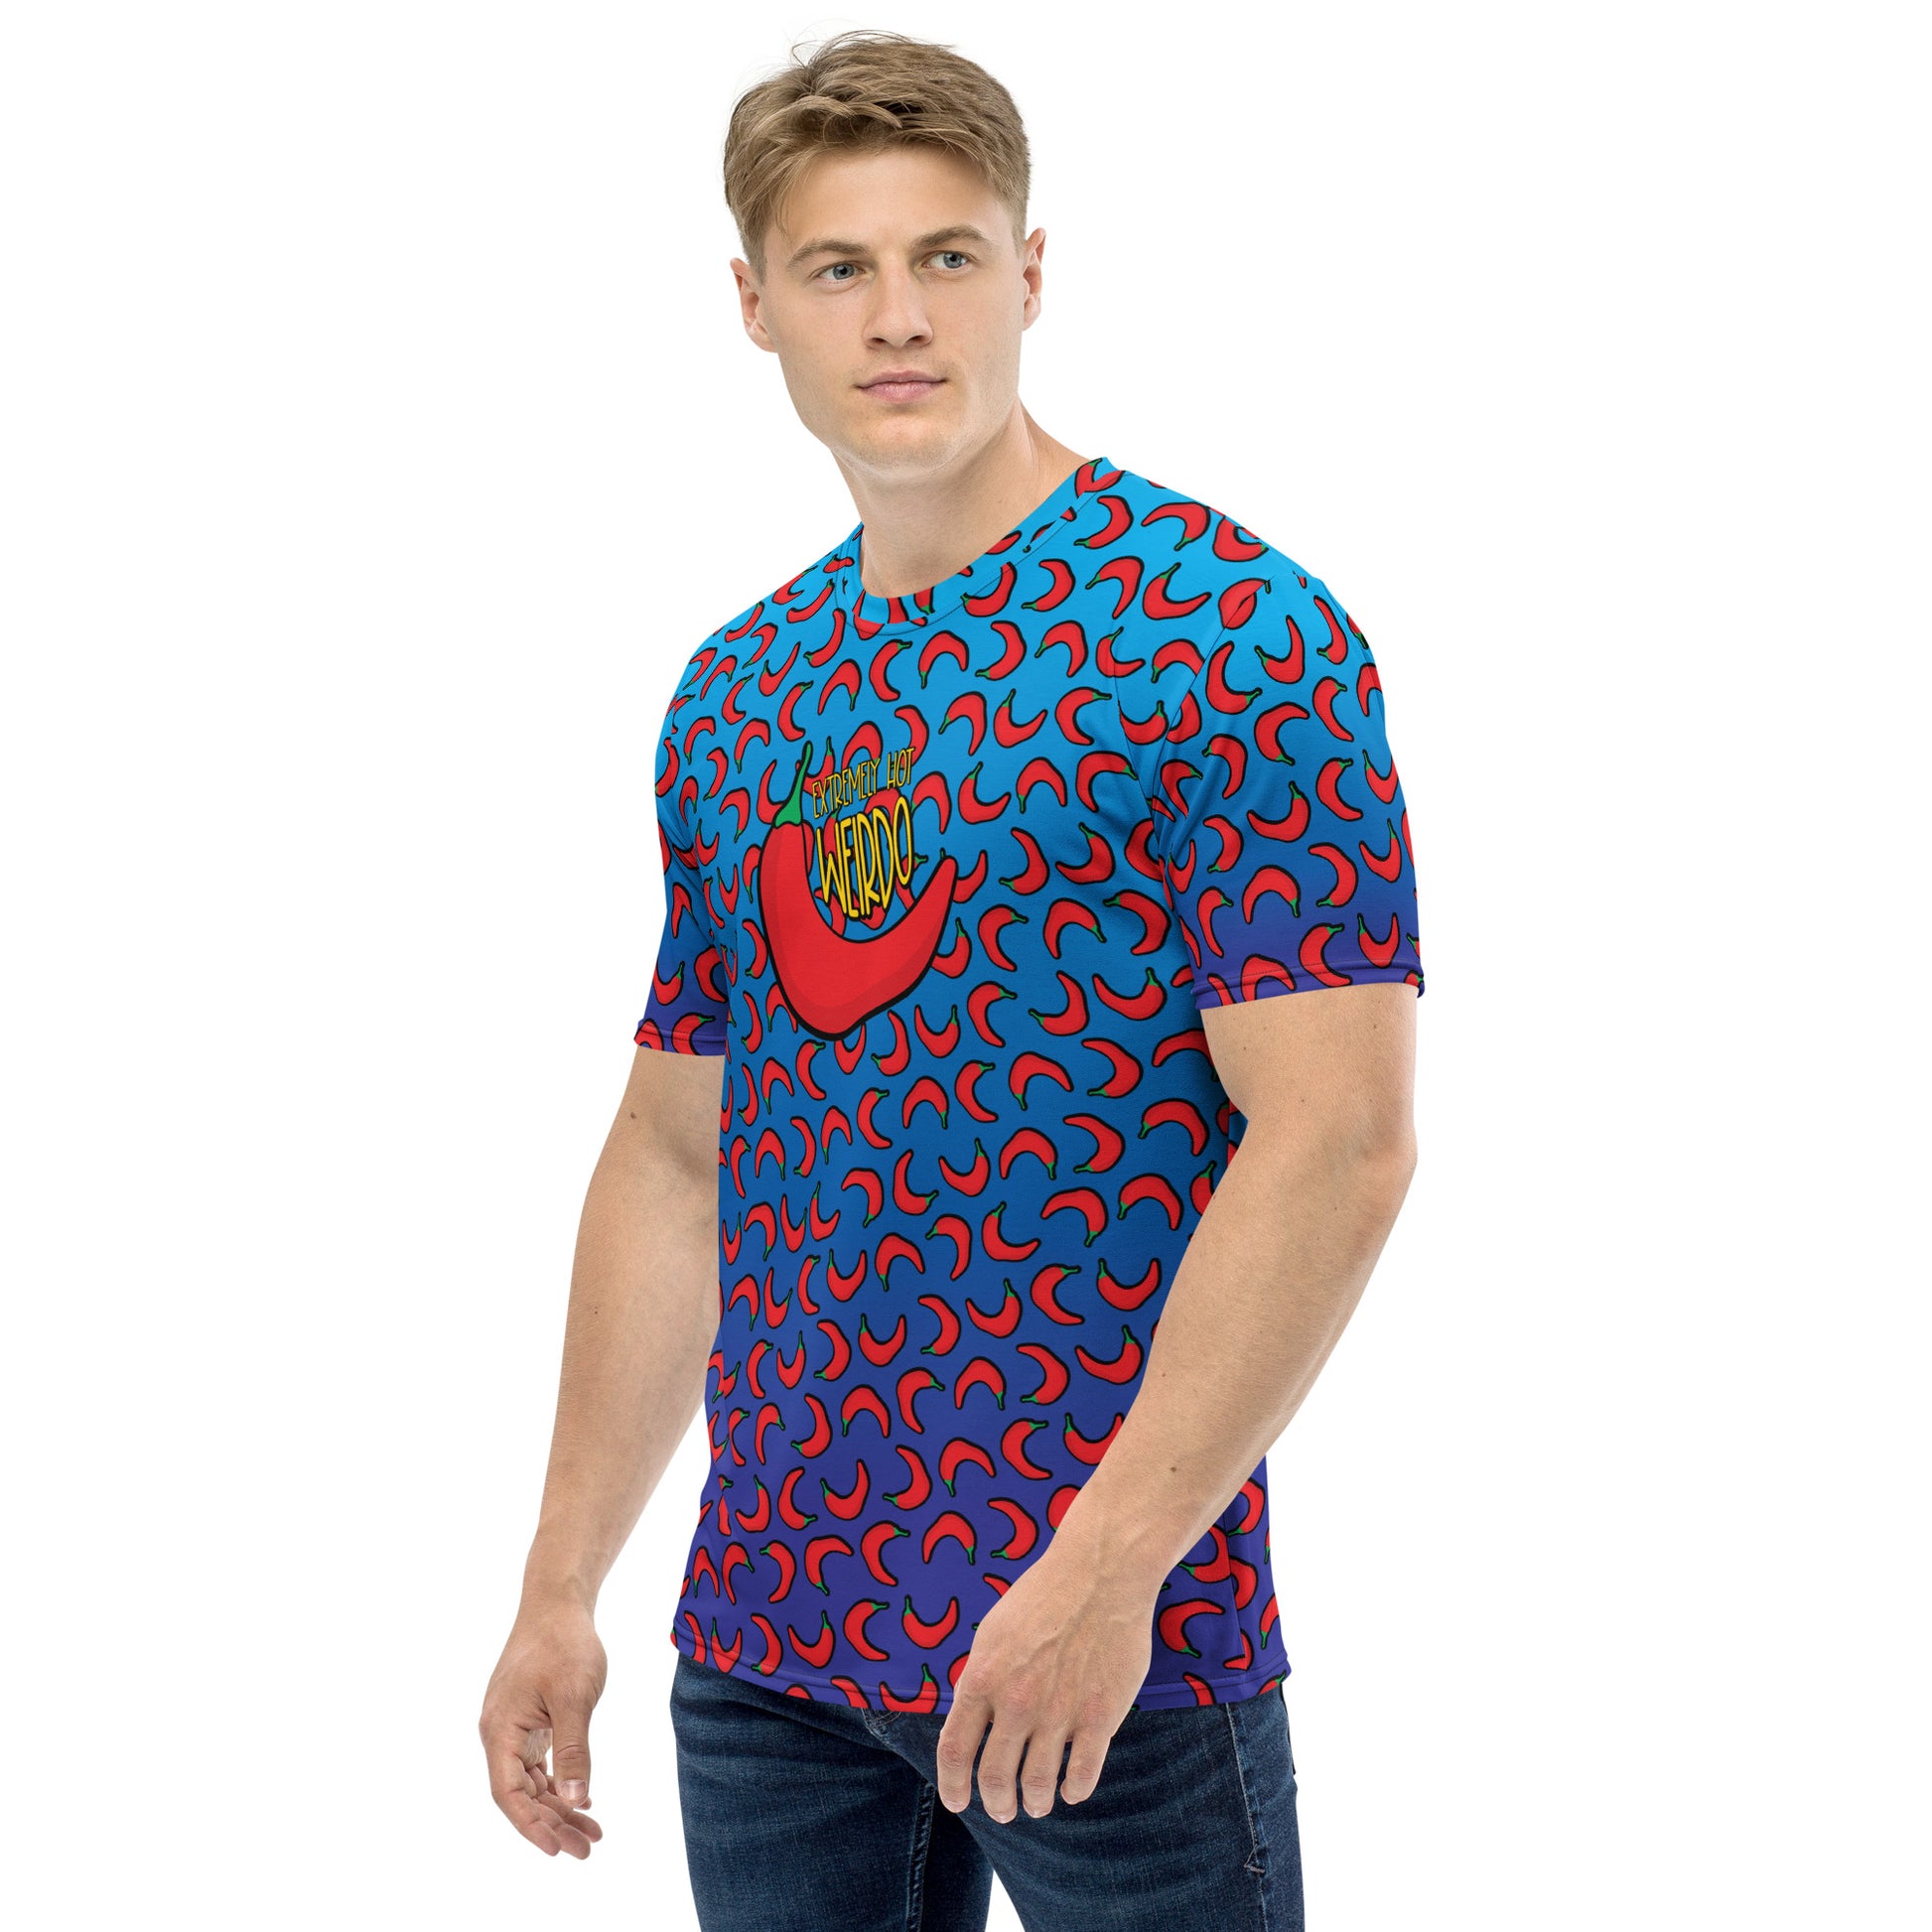 #WEIRDO | Welcome to the funny t shirt company! This blue t shirt for men with contrasting red peppers will weird people definitely notice you. Awkward meme printed at the back of the men’s t-shirt, Extremely Hot Weirdo.